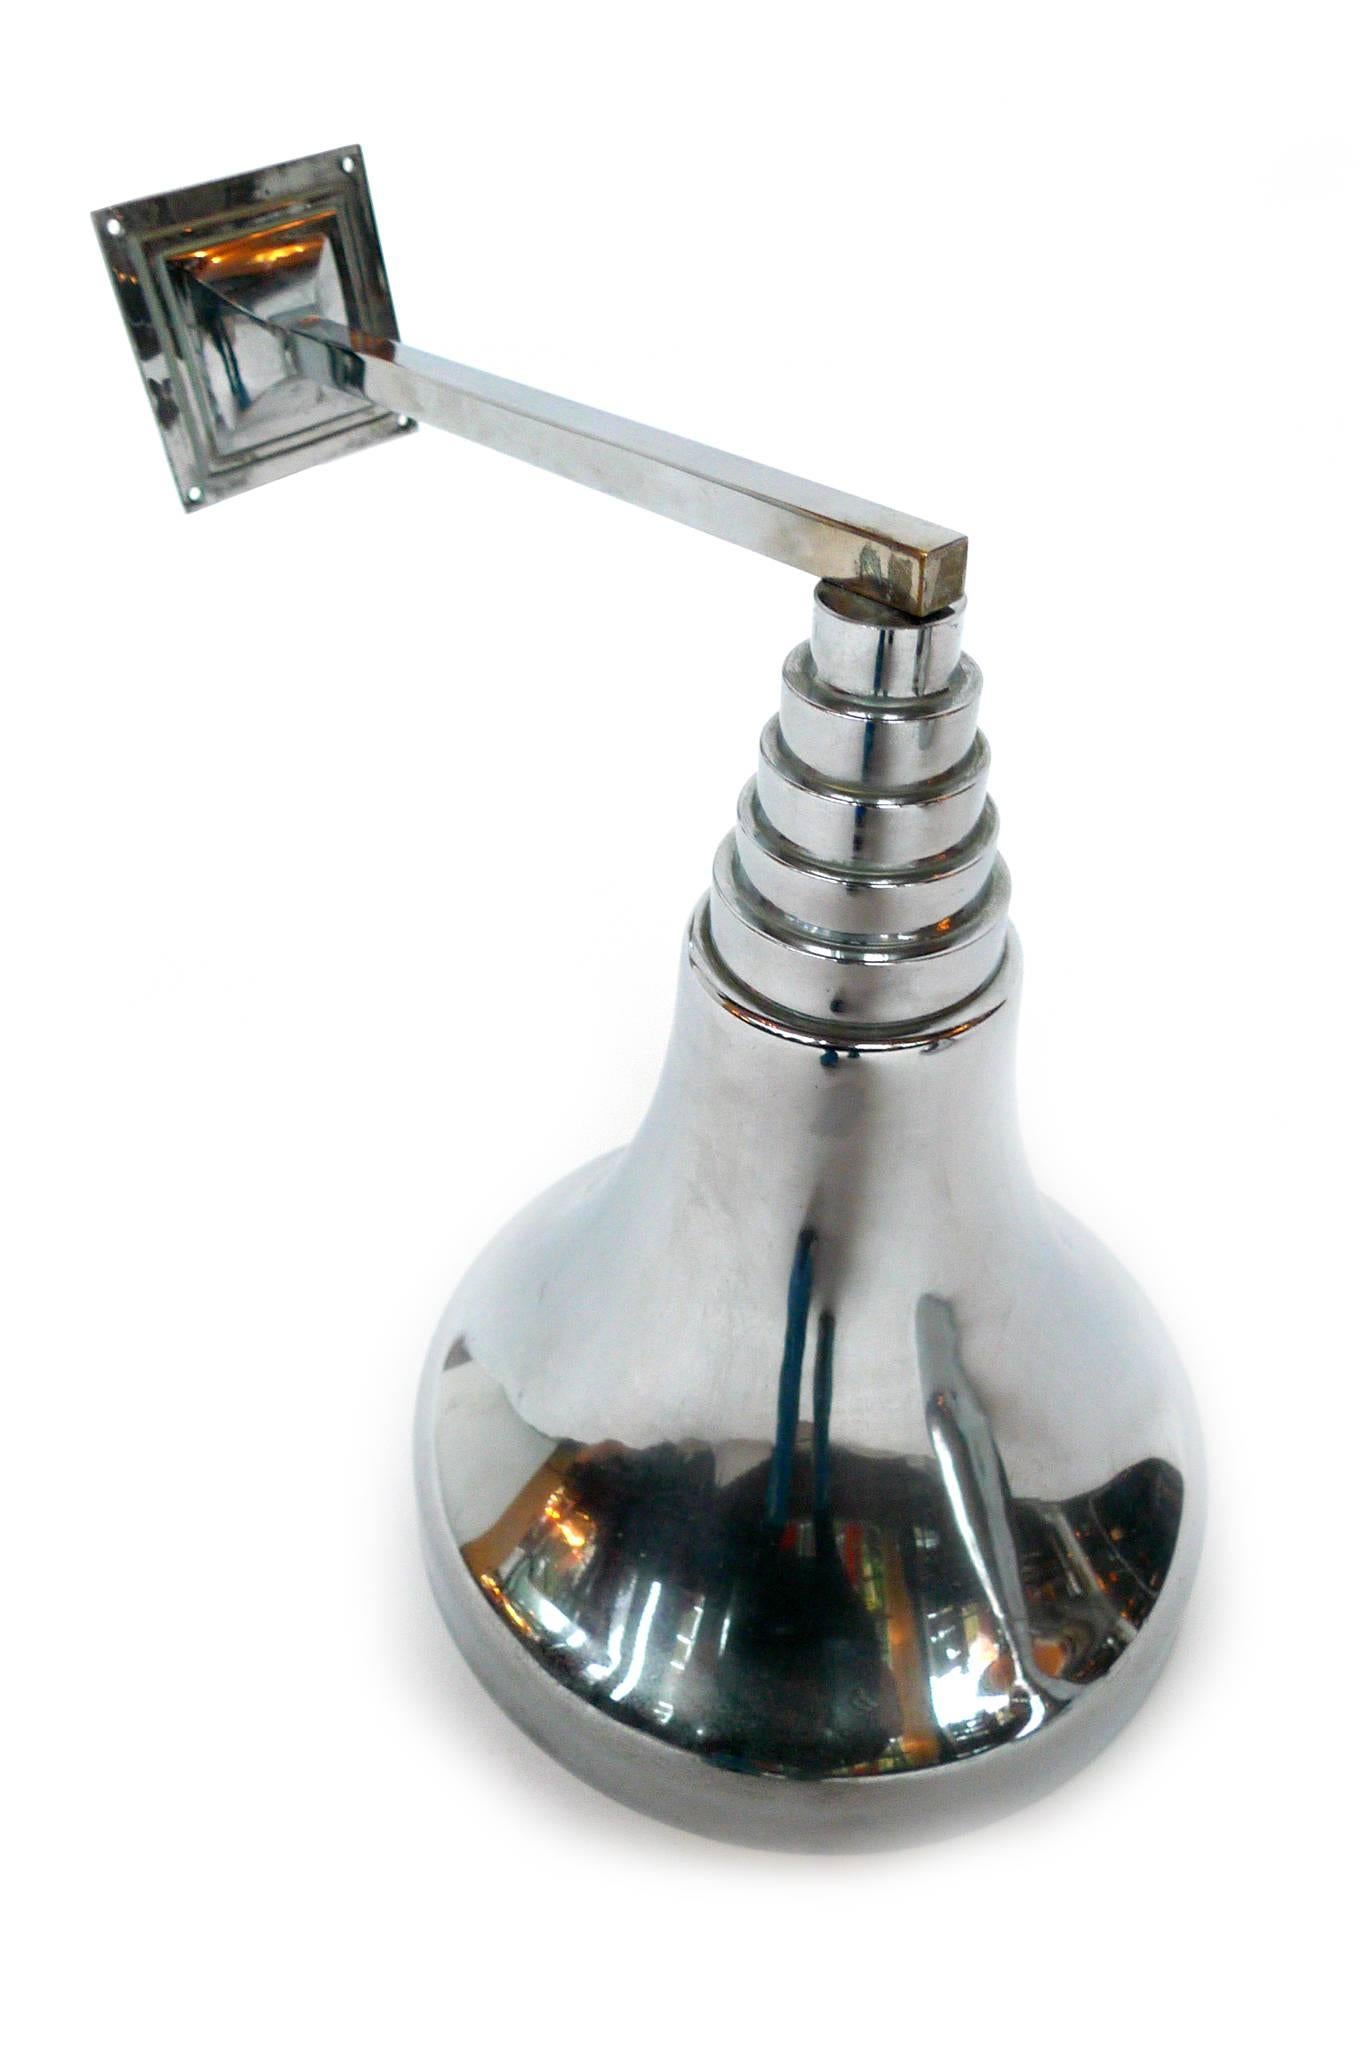 These Art Deco-style chrome sconces have a tiered shape. Their design includes a 13 1/4